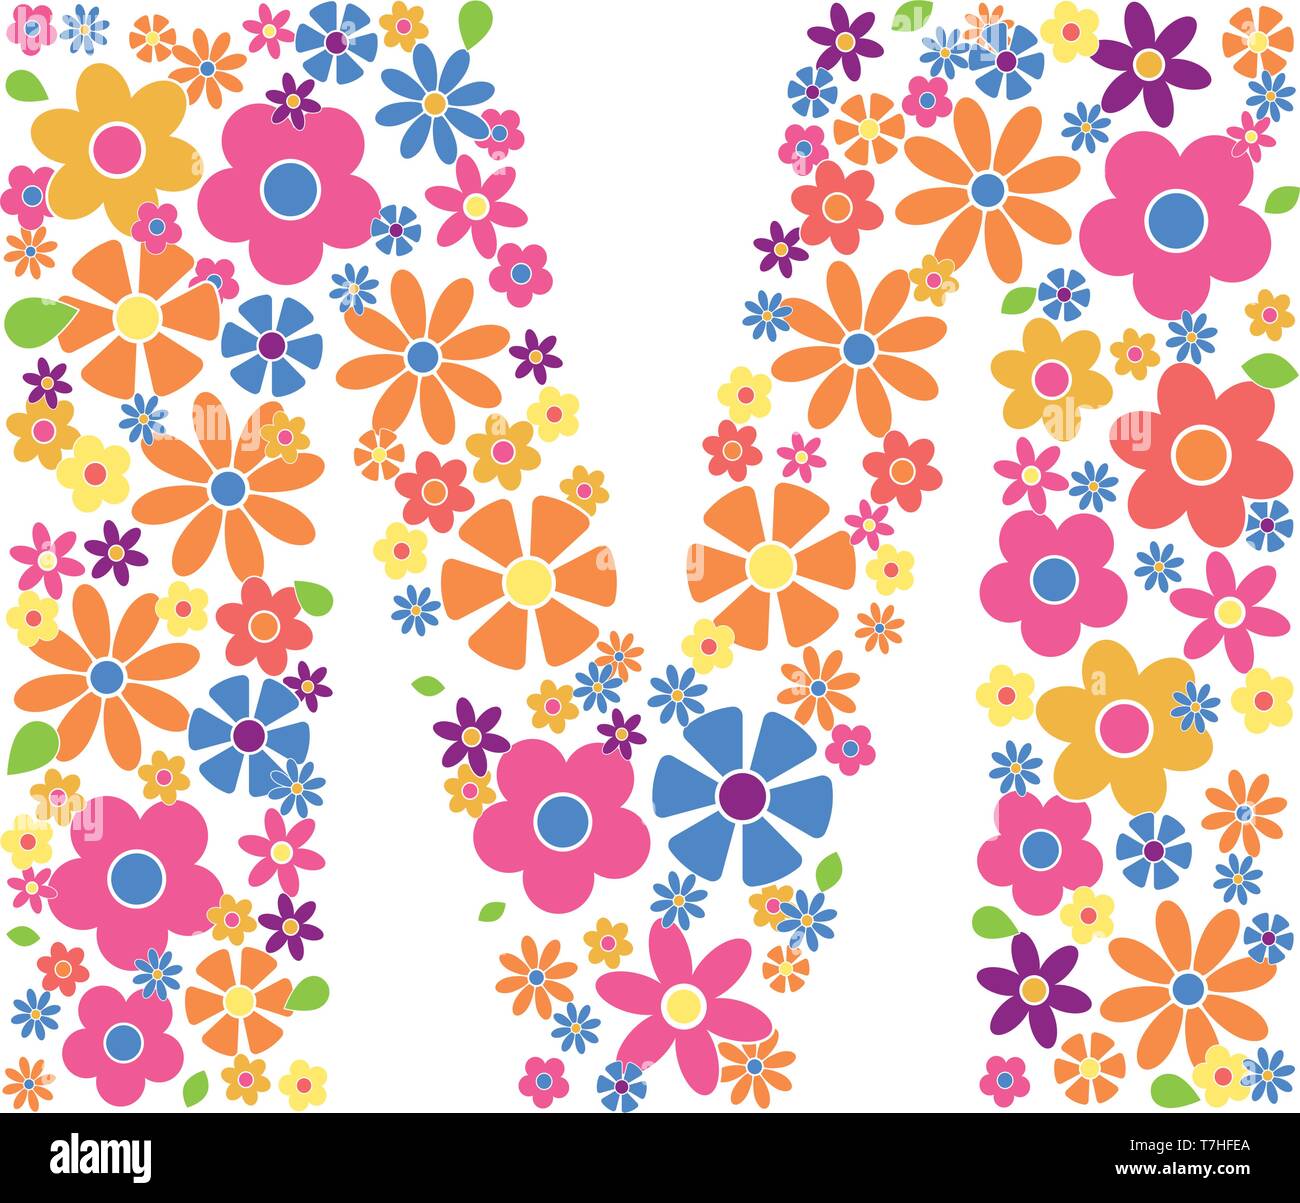 Letter M filled with a variety of colorful flowers isolated on white background vector illustration Stock Vector